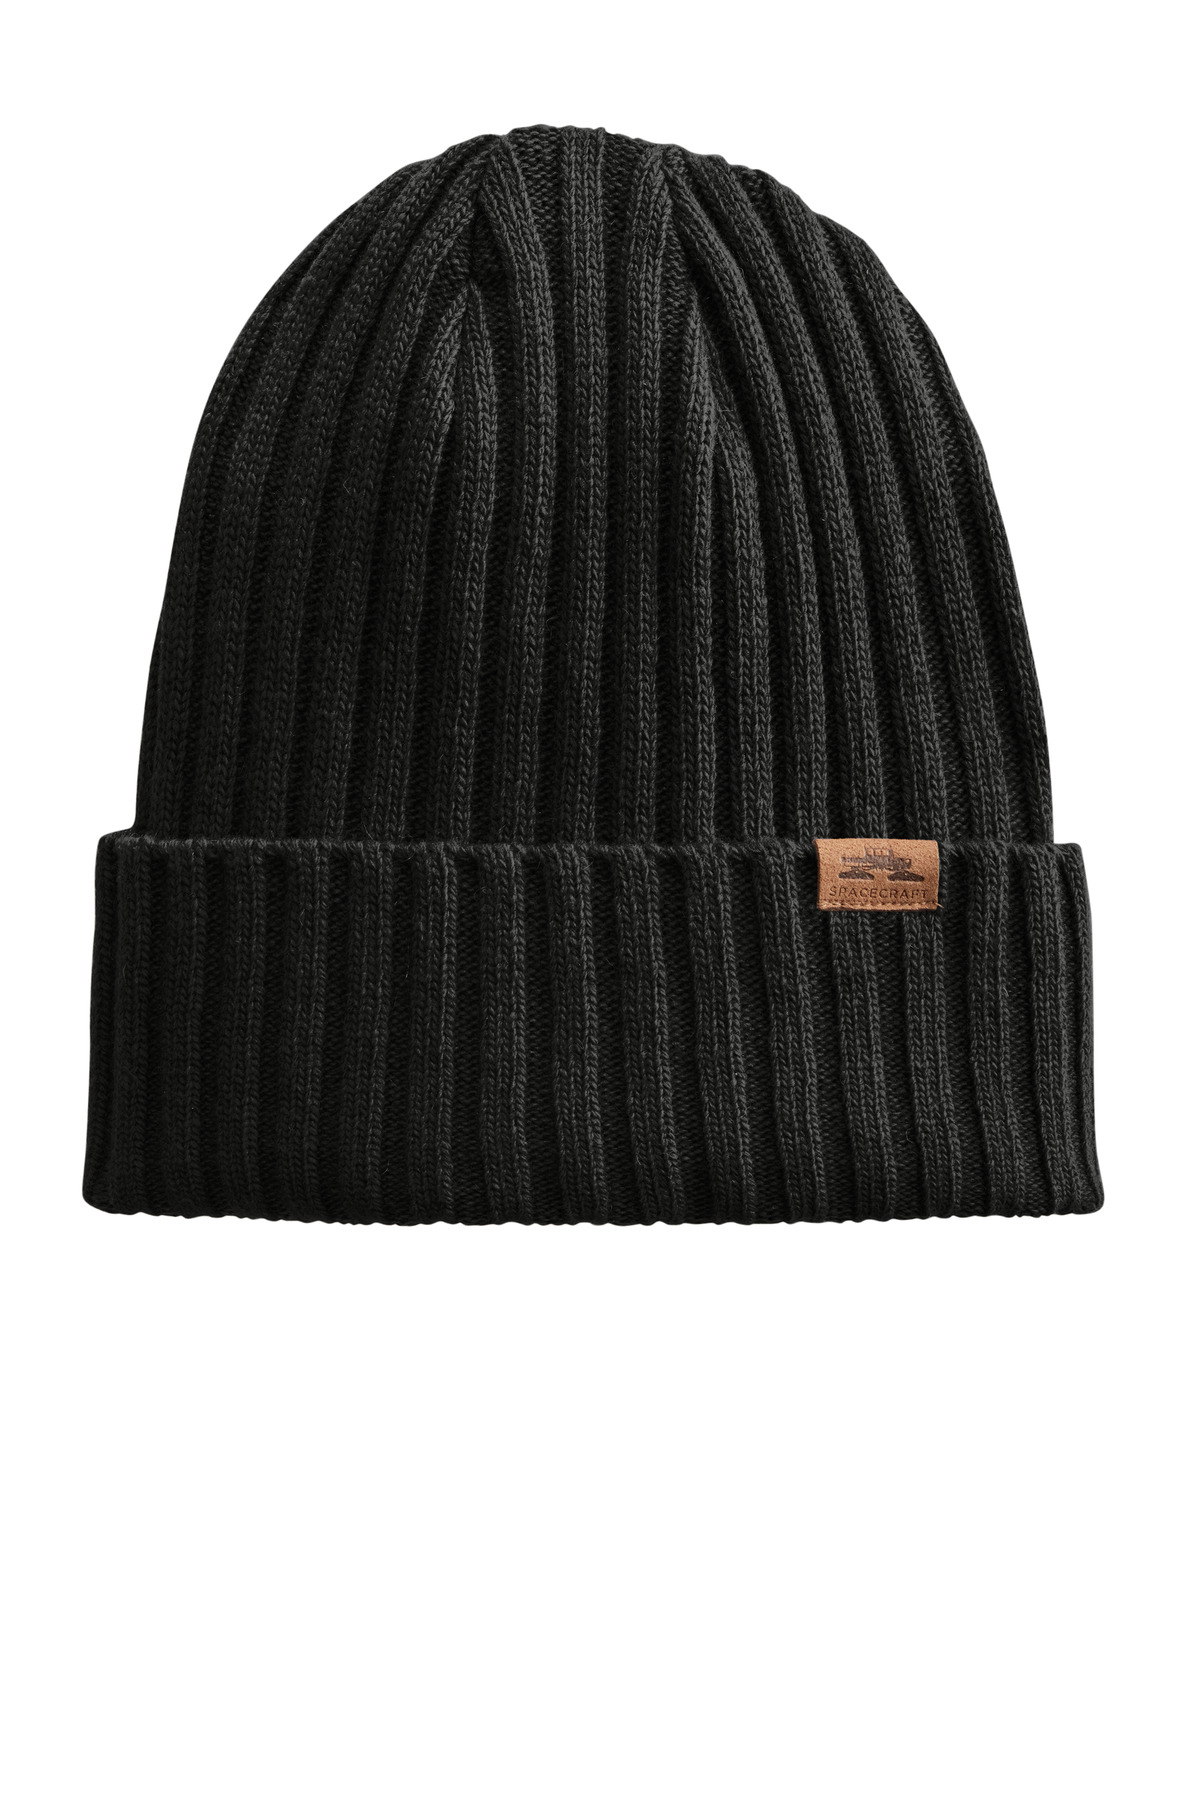 LIMITED EDITION Spacecraft Square Knot Beanie-Spacecraft